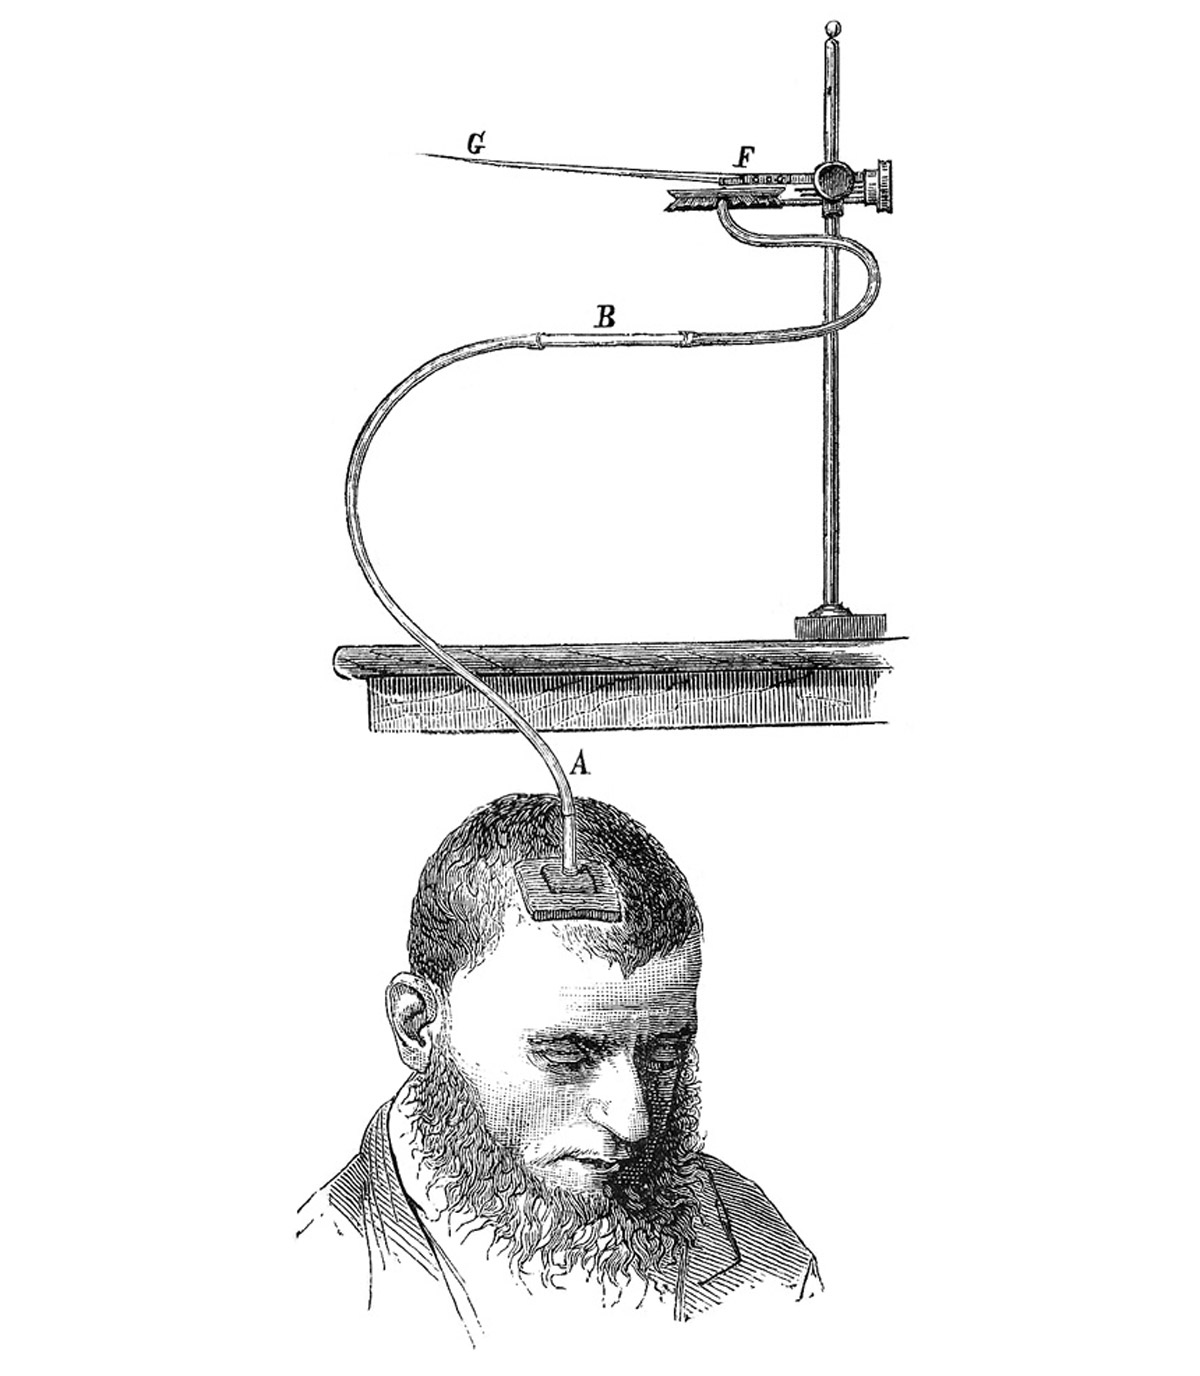 An illustration of an apparatus used for measuring the pulse of the brain, from 